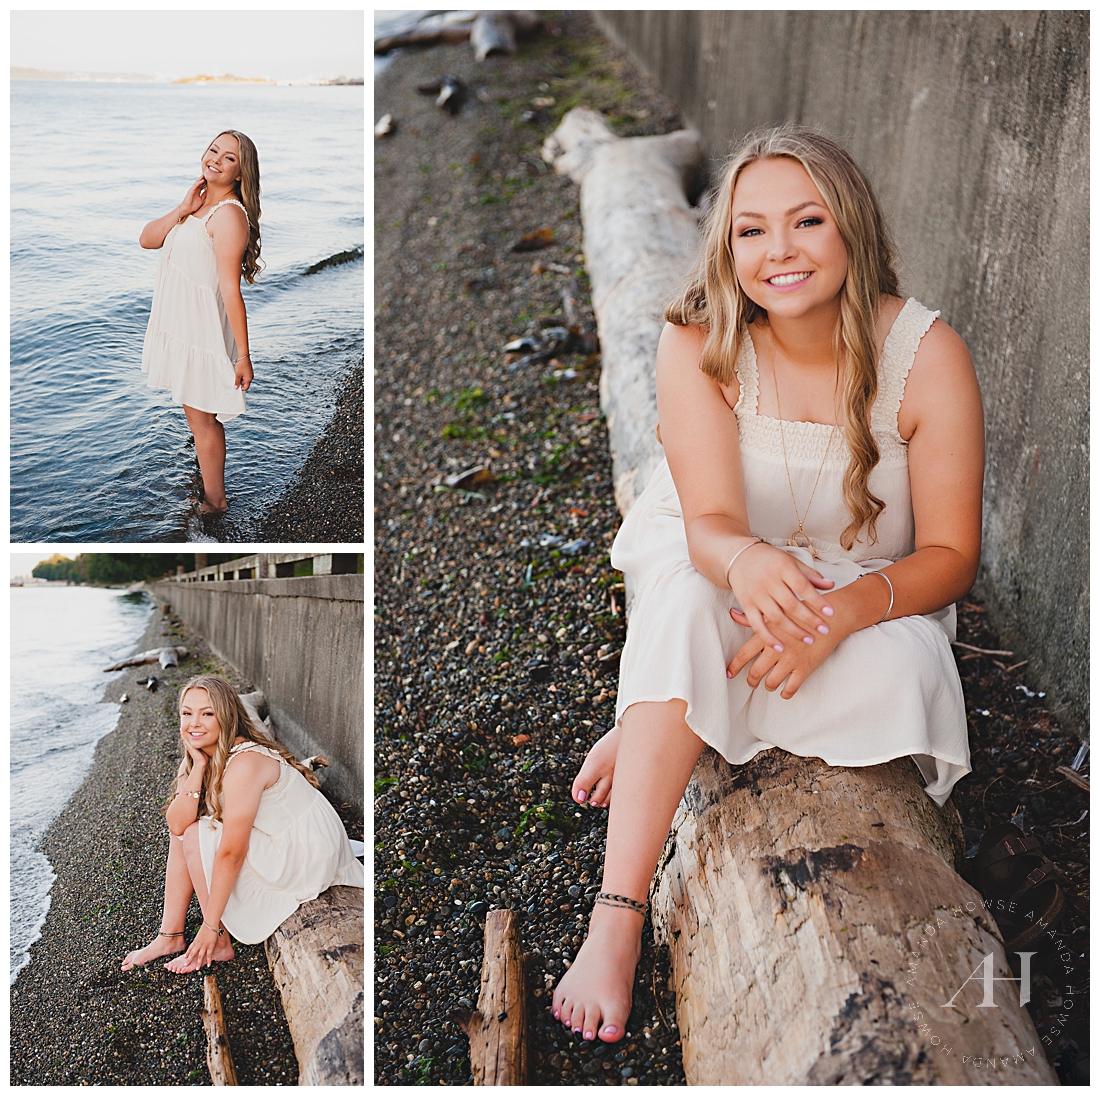 Barefoot senior portraits at Owen Beach | How to style a boho senior portrait session outdoors in the summer, pose ideas for senior girls, cute outfit ideas for summer senior portraits | Photographed by the Best Tacoma Senior Photographer Amanda Howse